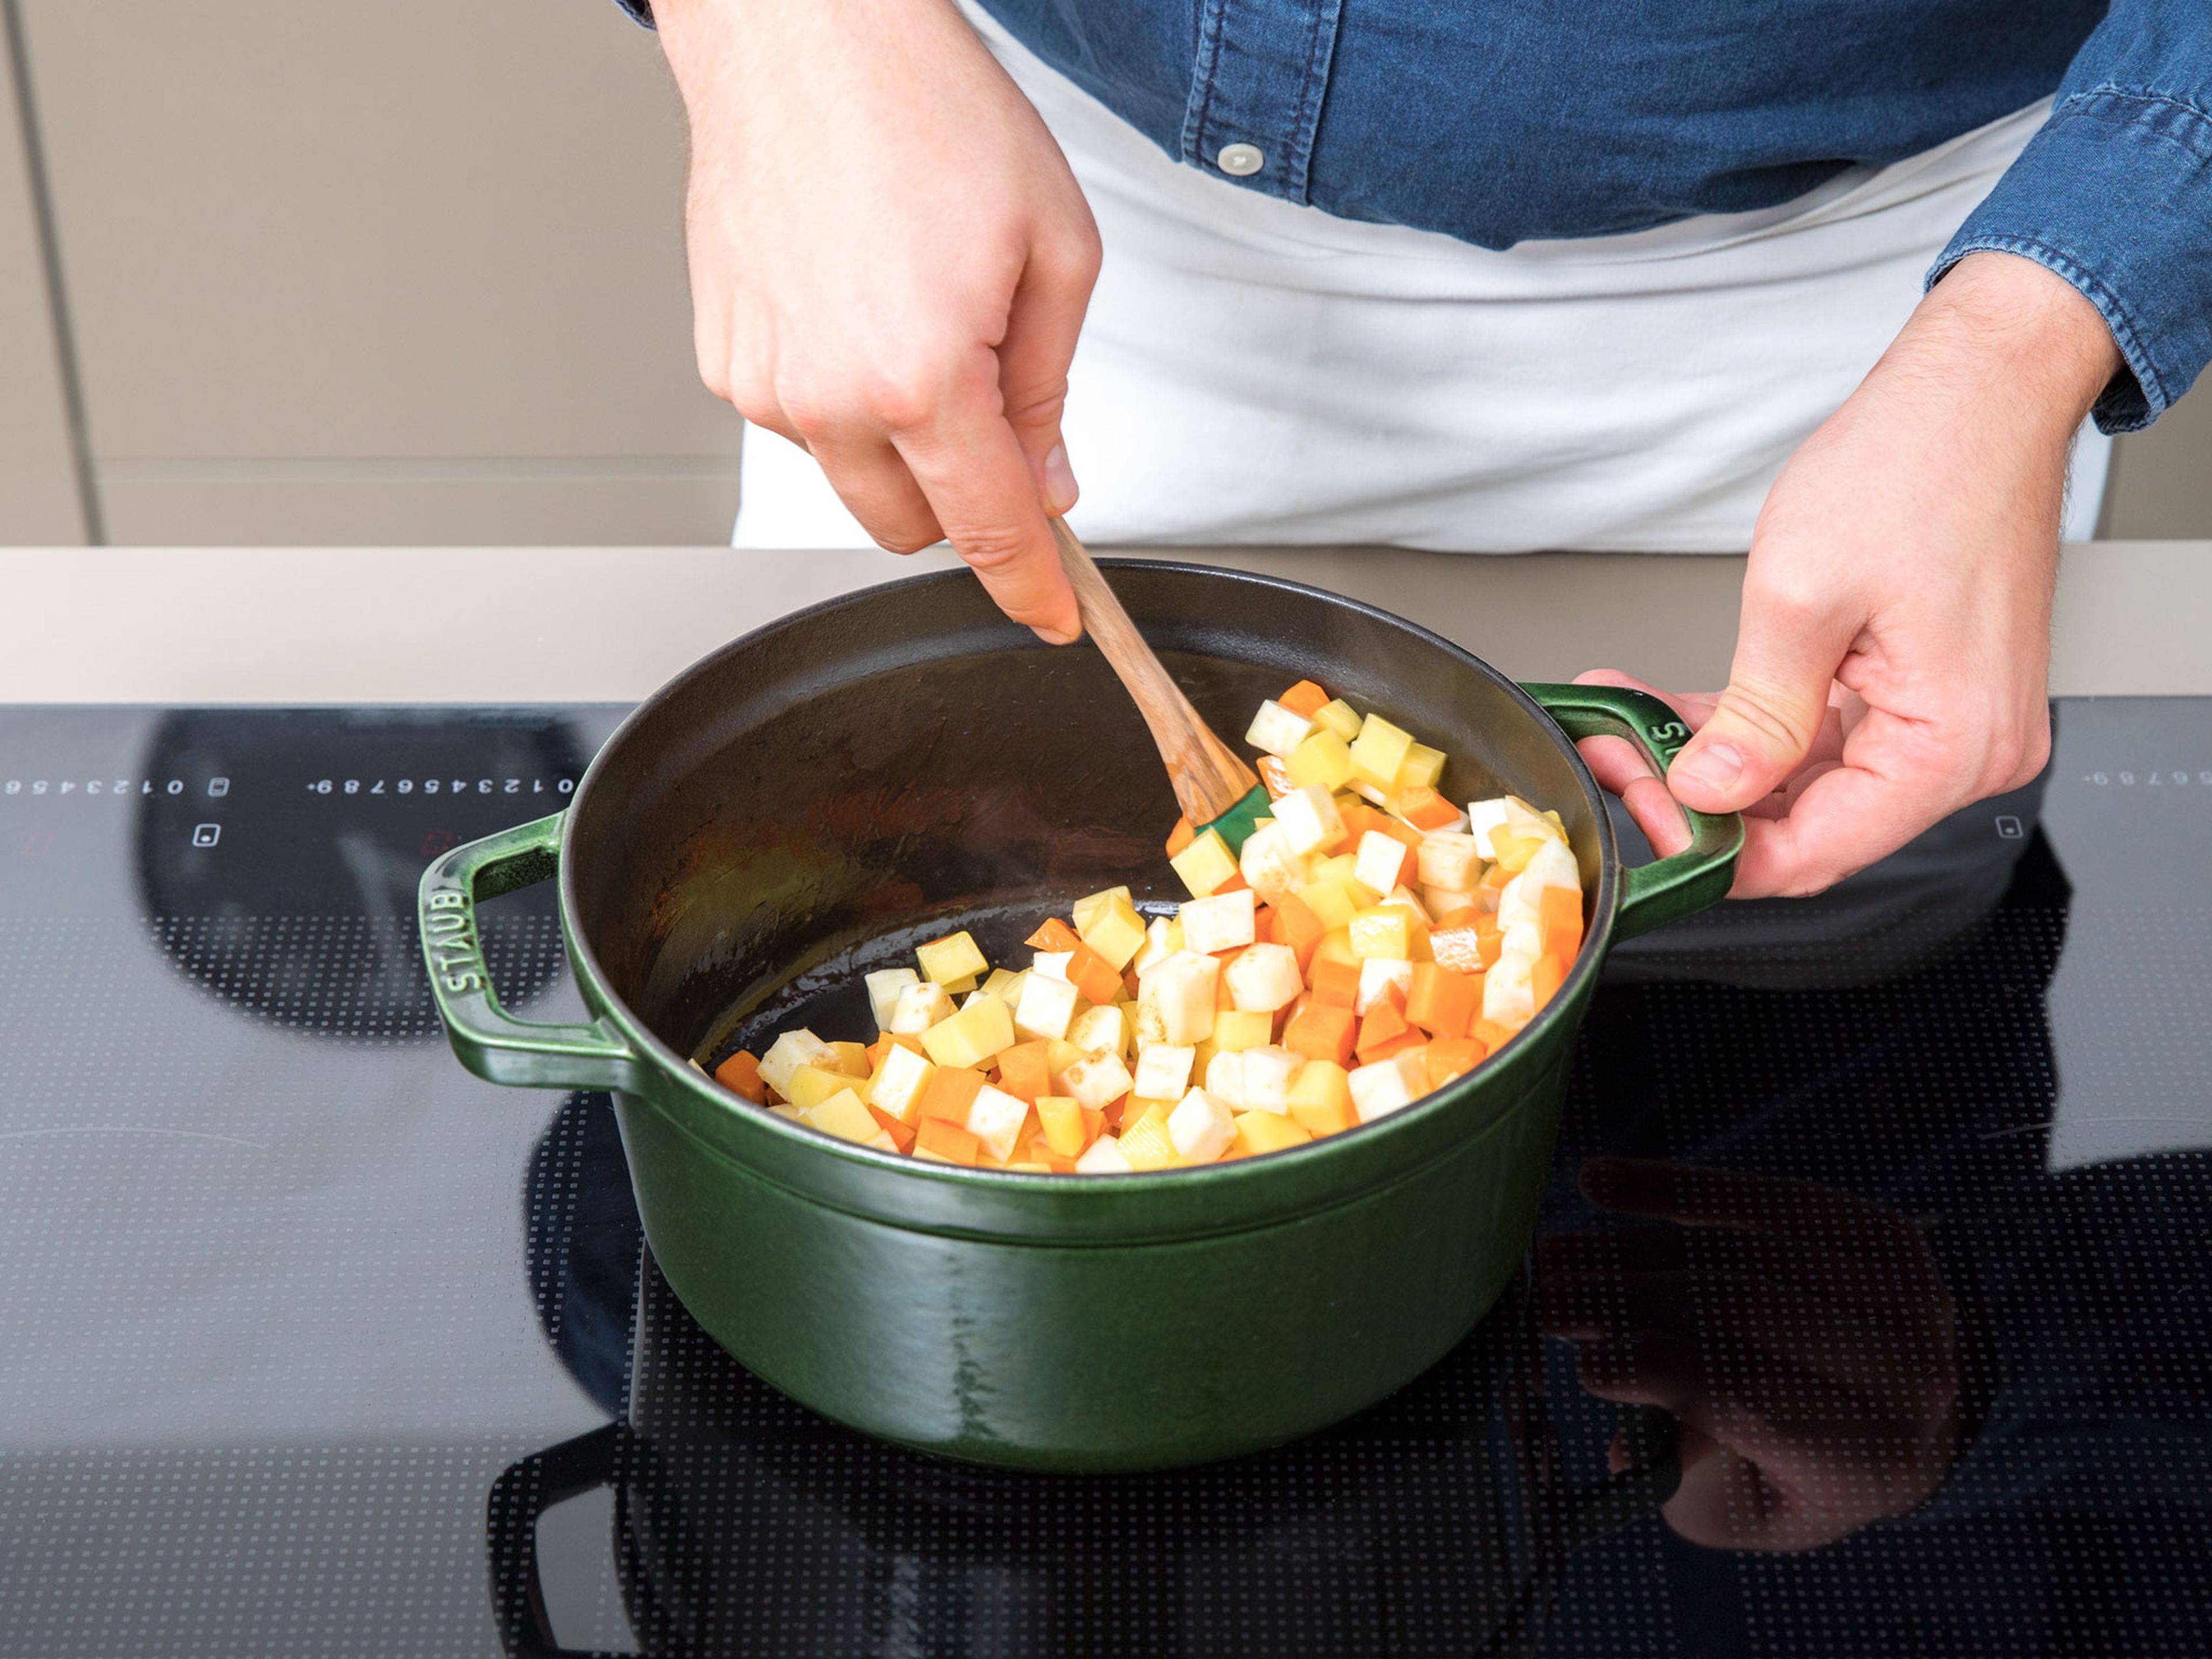 Melt some butter in a pot and add potatoes and remaining diced vegetables. Sauté for approx. 1 –2 min. Add some flour, stir well, and deglaze with enough veal stock to cover the vegetables. Season with salt and nutmeg and let simmer for approx. 15 min.